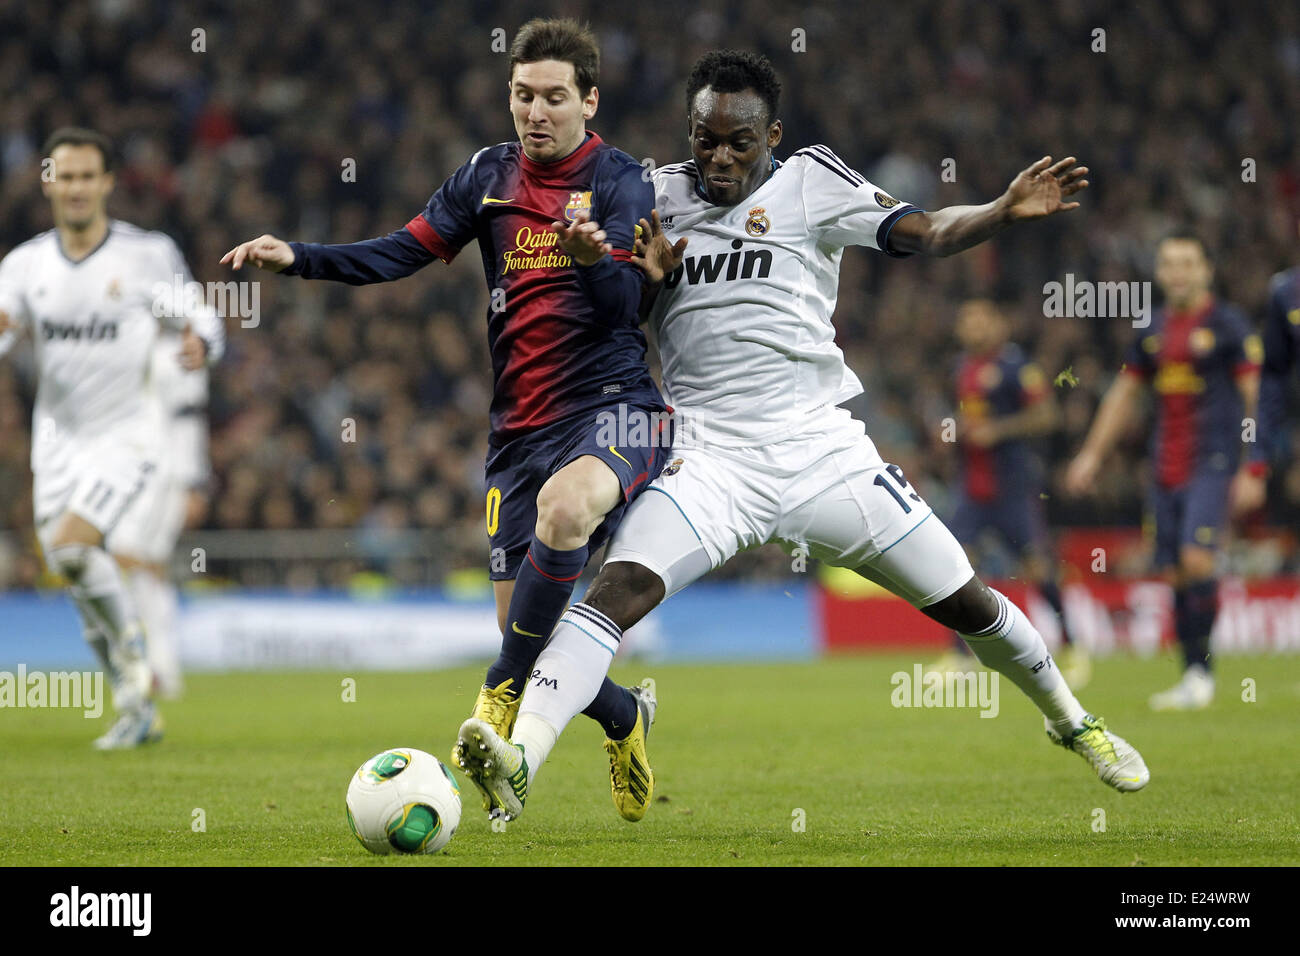 Real Madrid welcome Barcelona FC to the Santiago Bernabeu stadium in the Copa del Rey Semi-Final 1st leg. The match finished 1-1.  Featuring: Lionel Messi,Michael Essien Where: Madrid, Spain When: 30 Jan 2013 Stock Photo